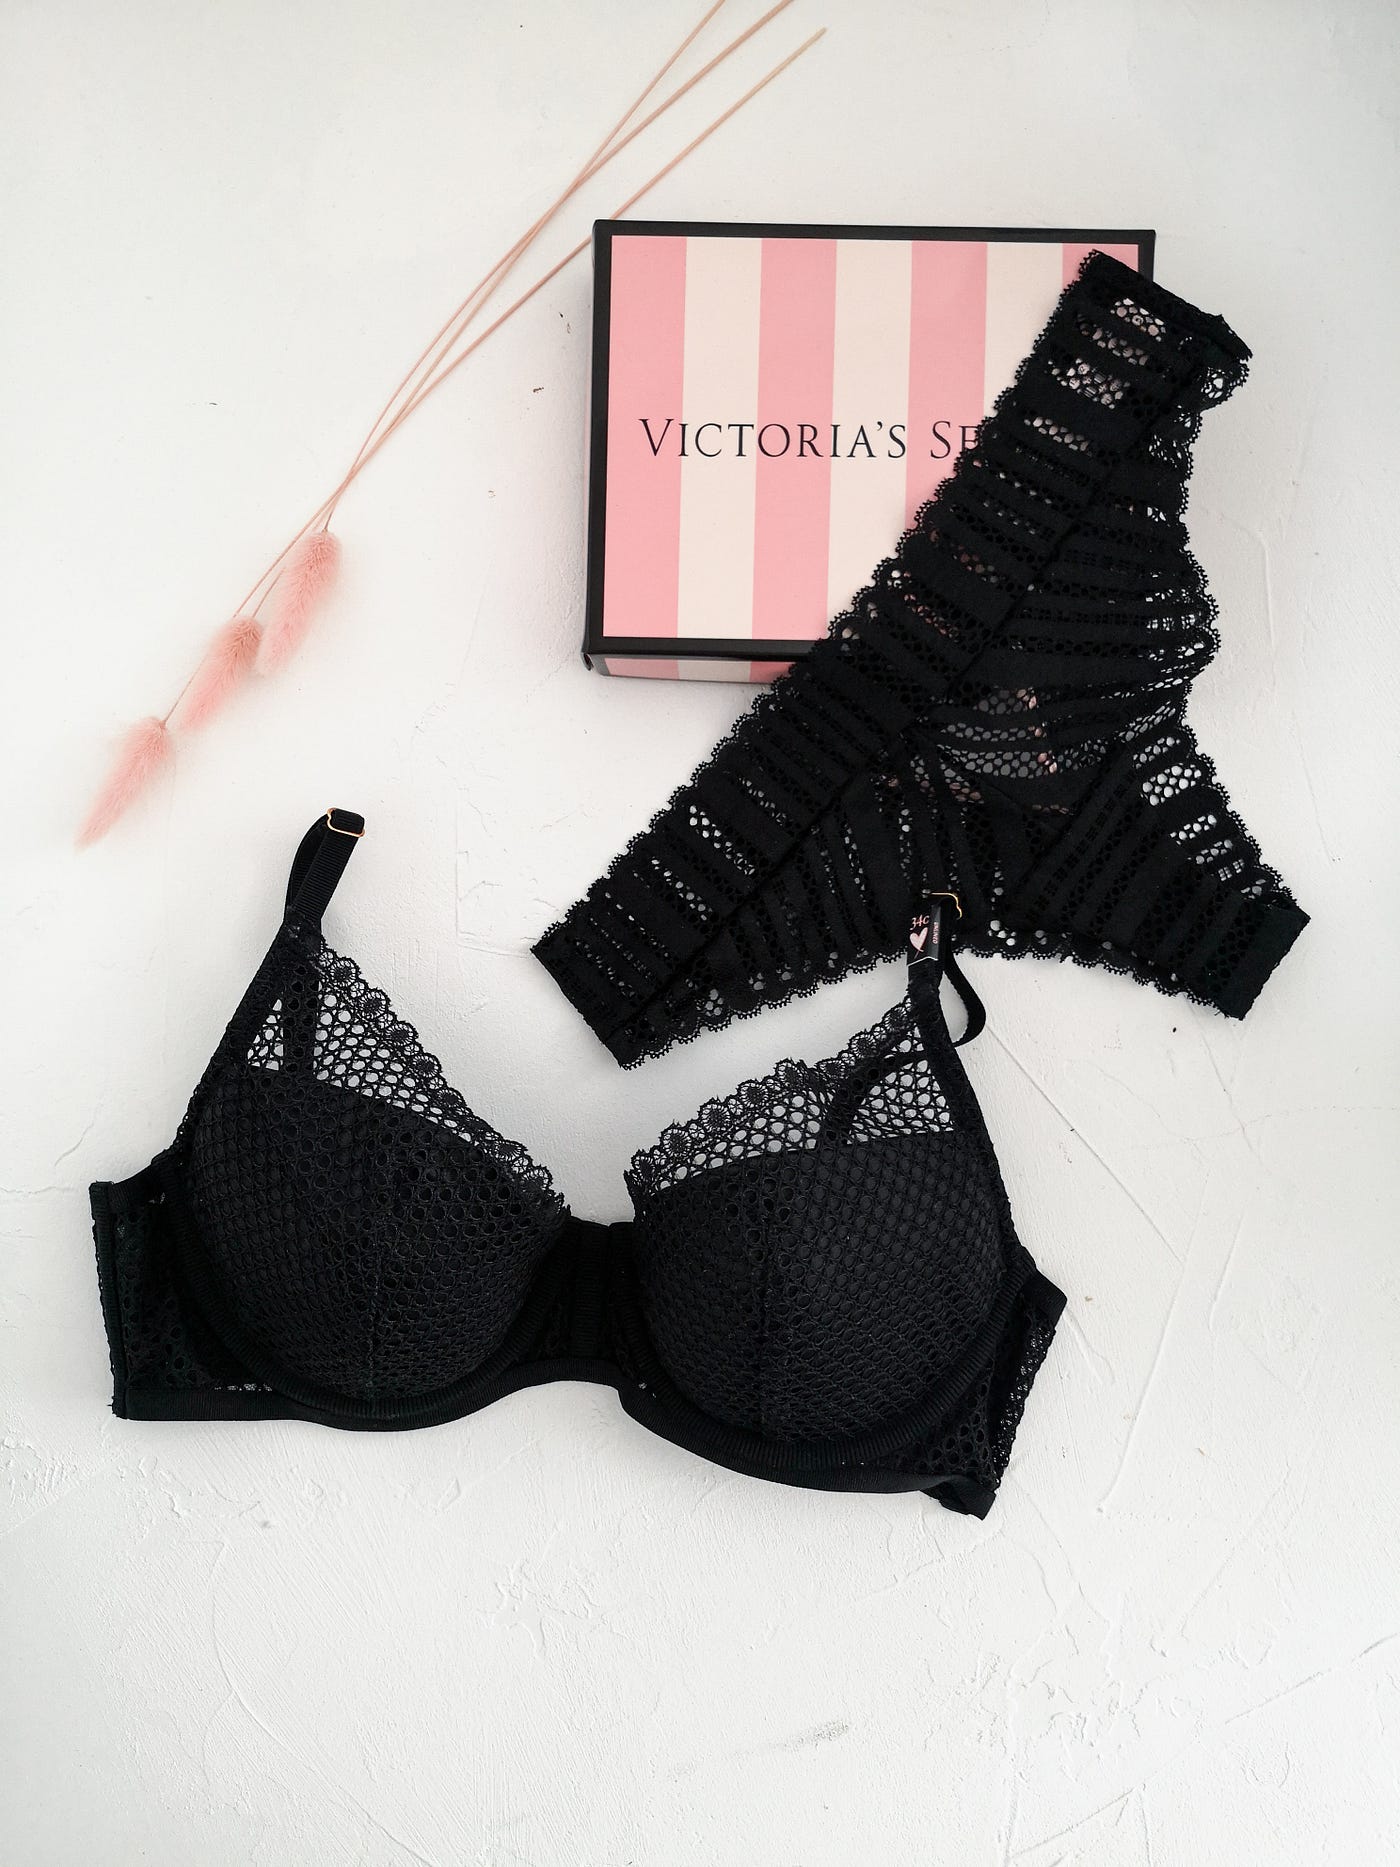 3 Super Simple Tips to Buy Lingerie for Your Wife or Girlfriend